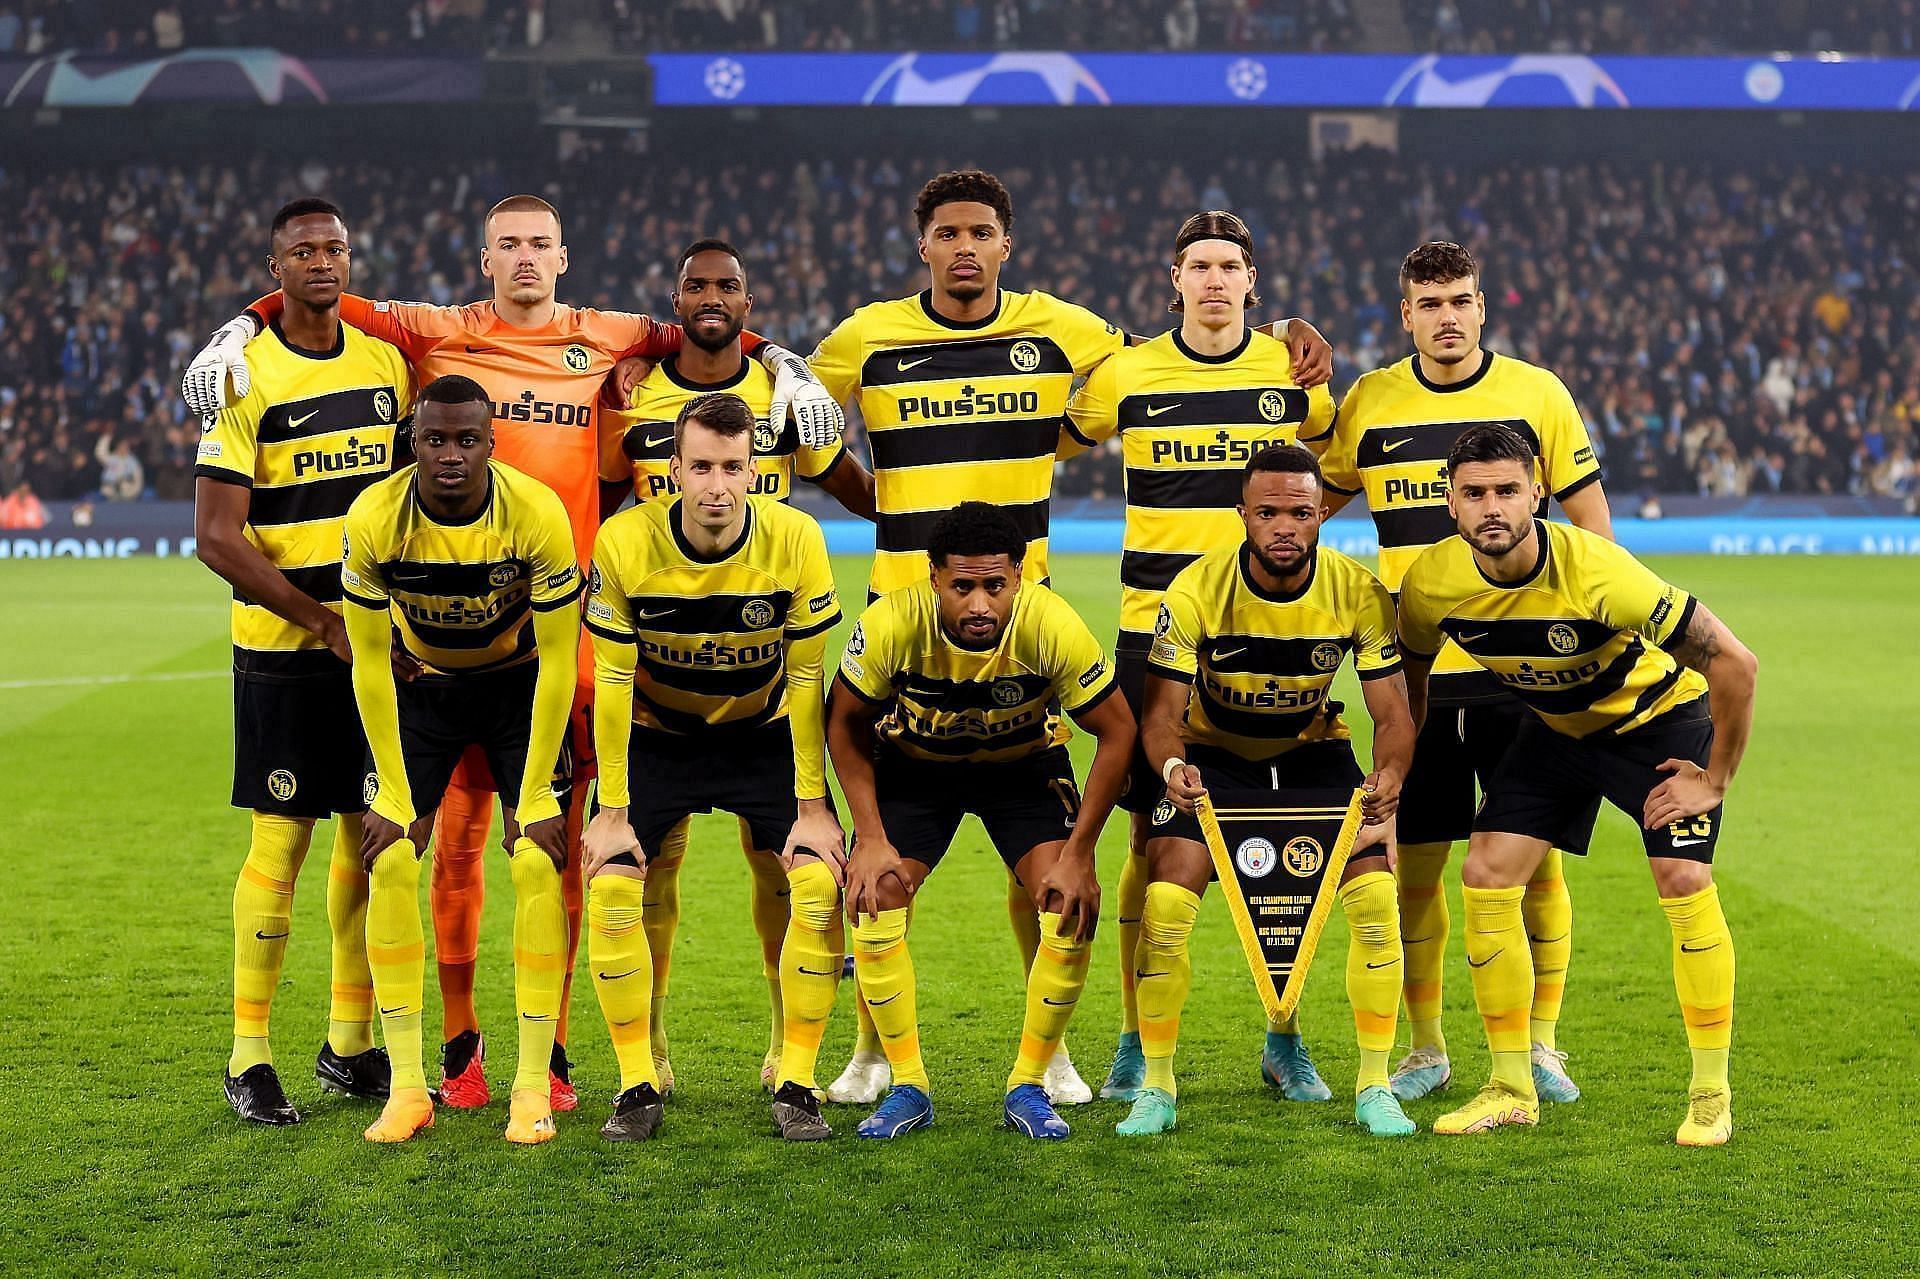 Young Boys host Stade-Lausanne on Wednesday 